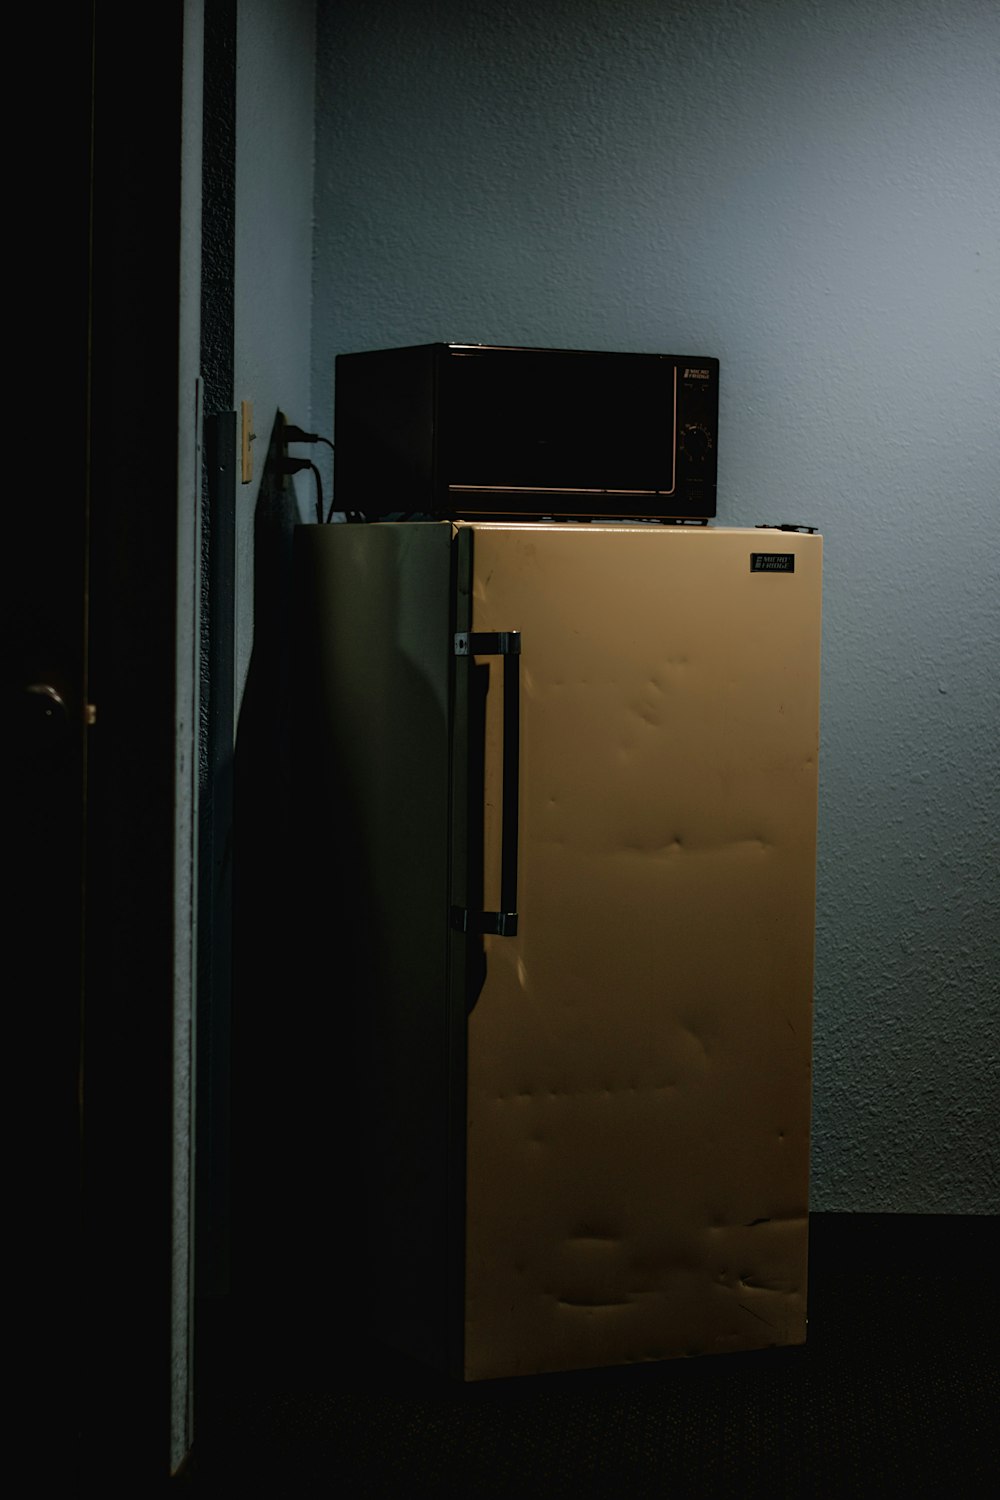 a refrigerator with a microwave on top of it